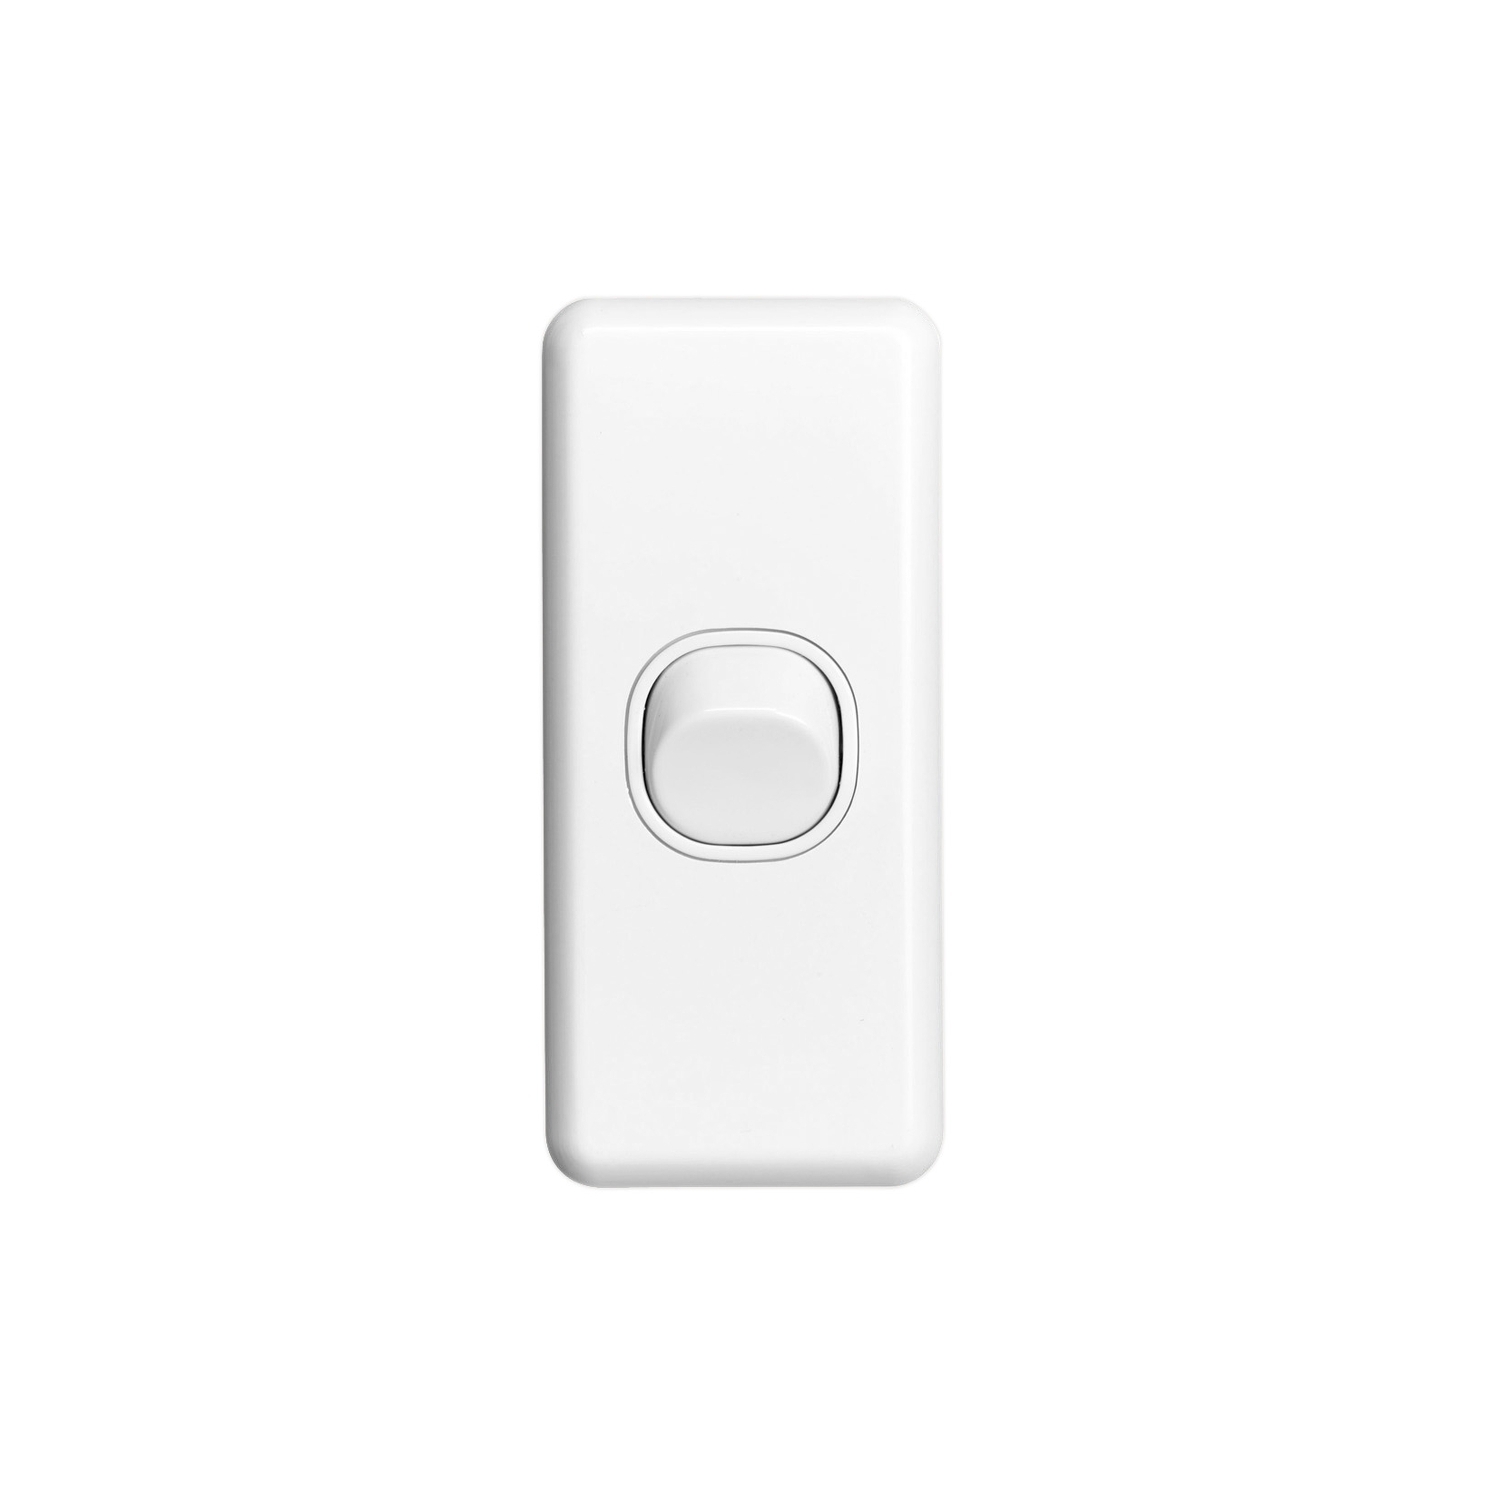 Switches - C2000 Series, Architrave Size, 1 Gang 250V 10A